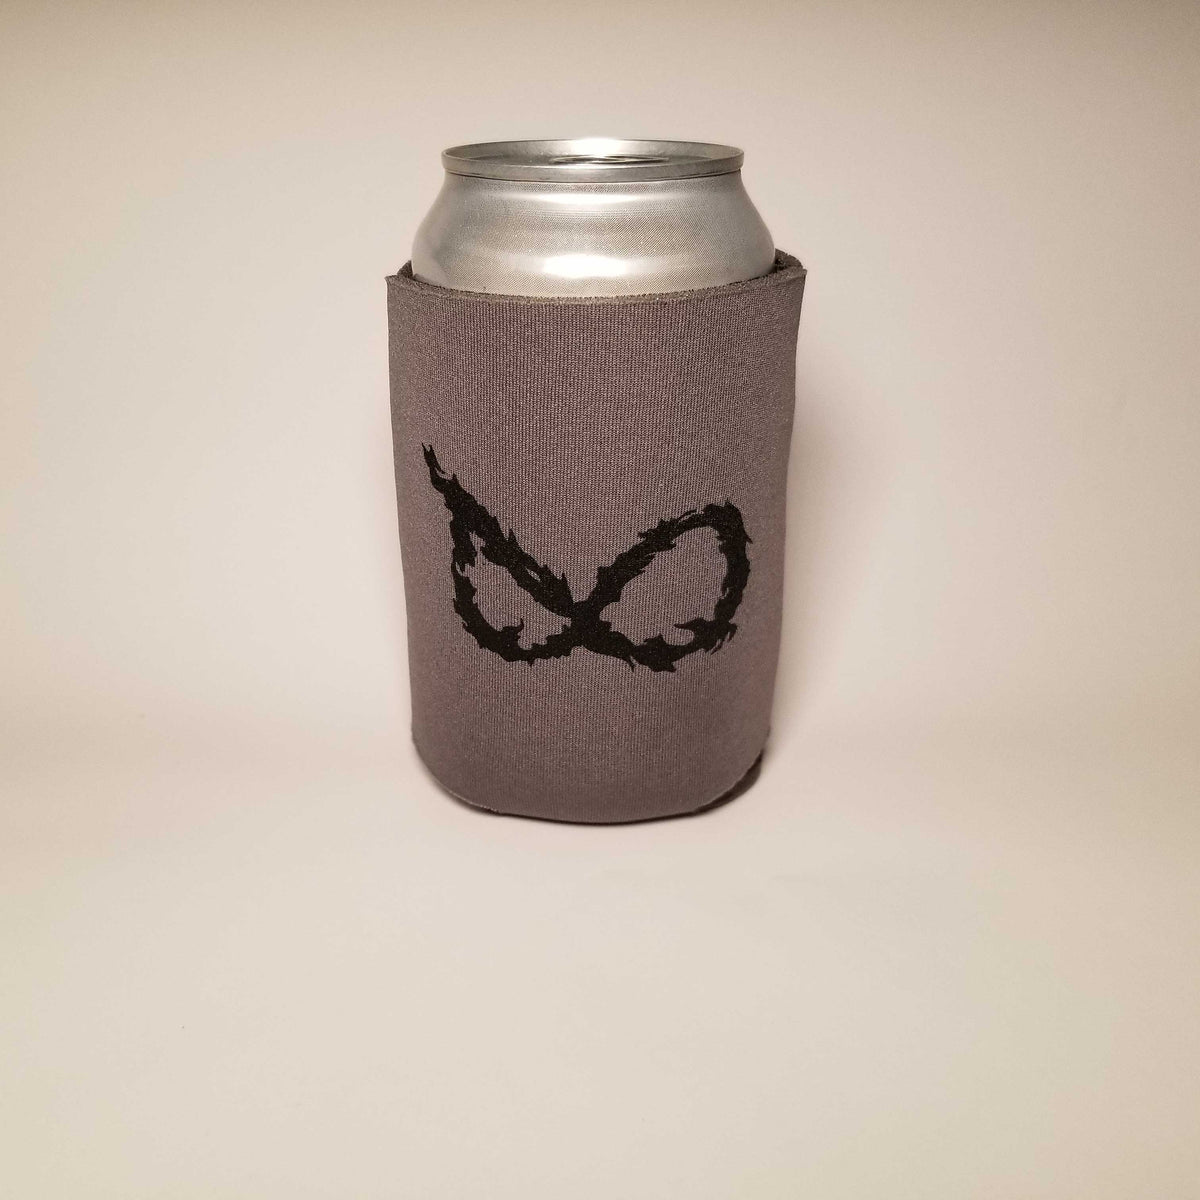 Burnin Eights Can Koozie - Black Out